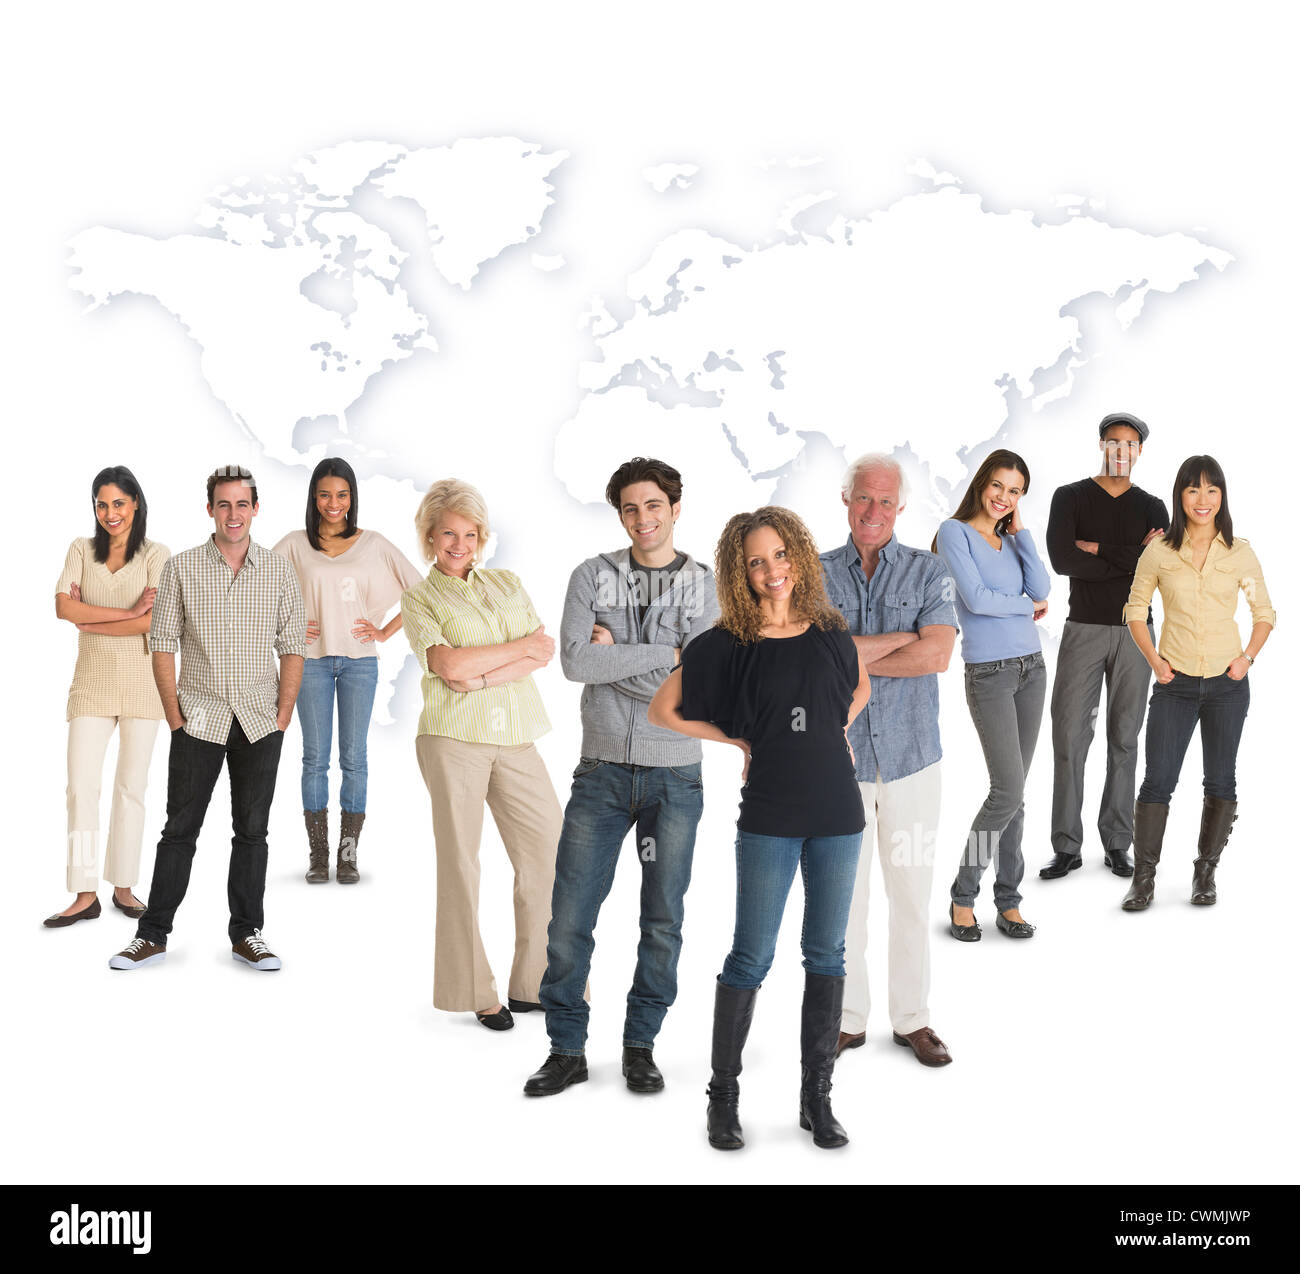 Multi-racial mixed race group of people posing together, world map in background Stock Photo